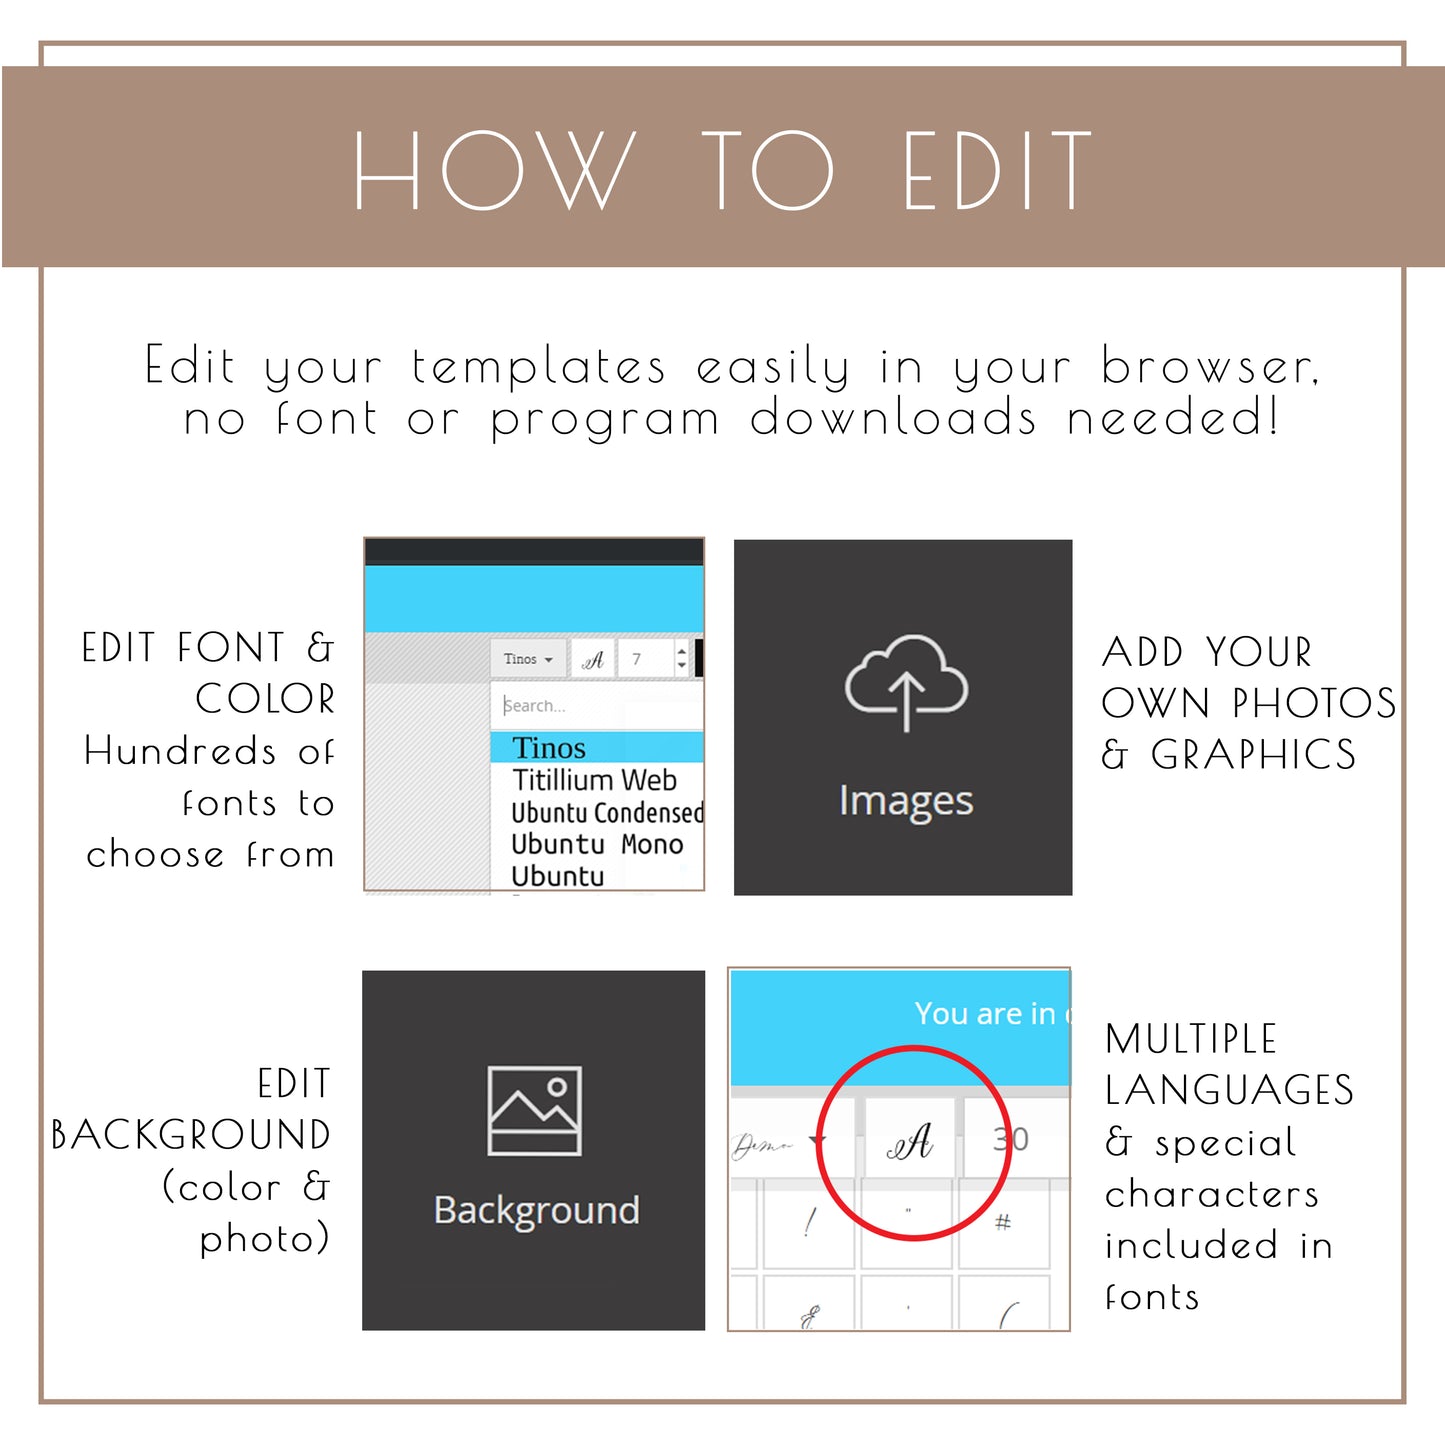 How to Edit your templates